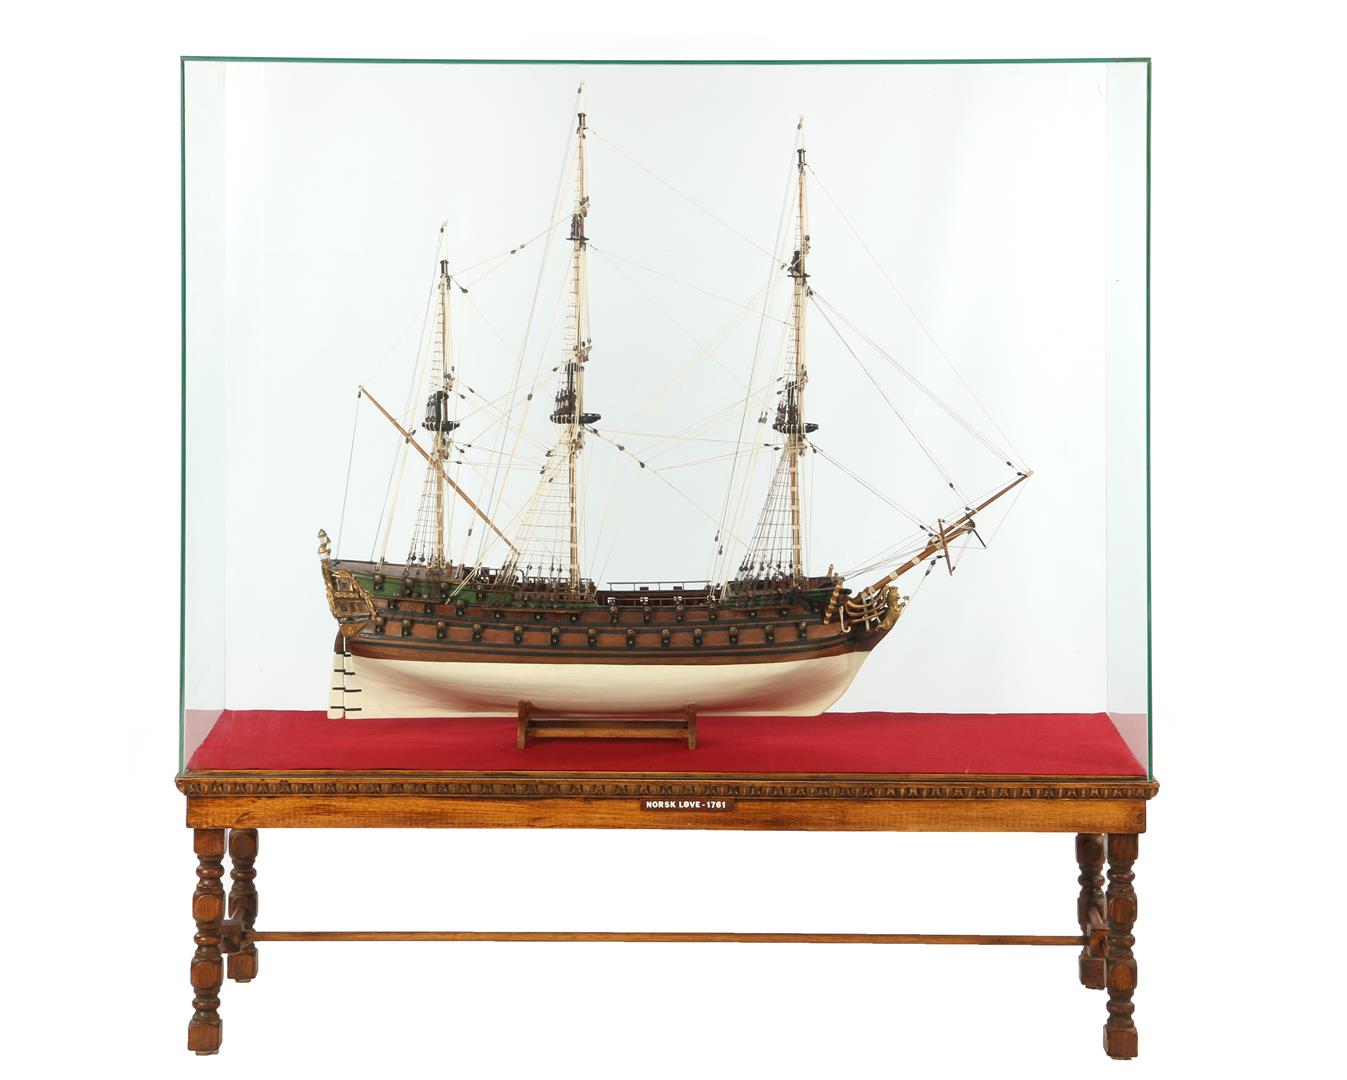 Wooden scale model of a three-master